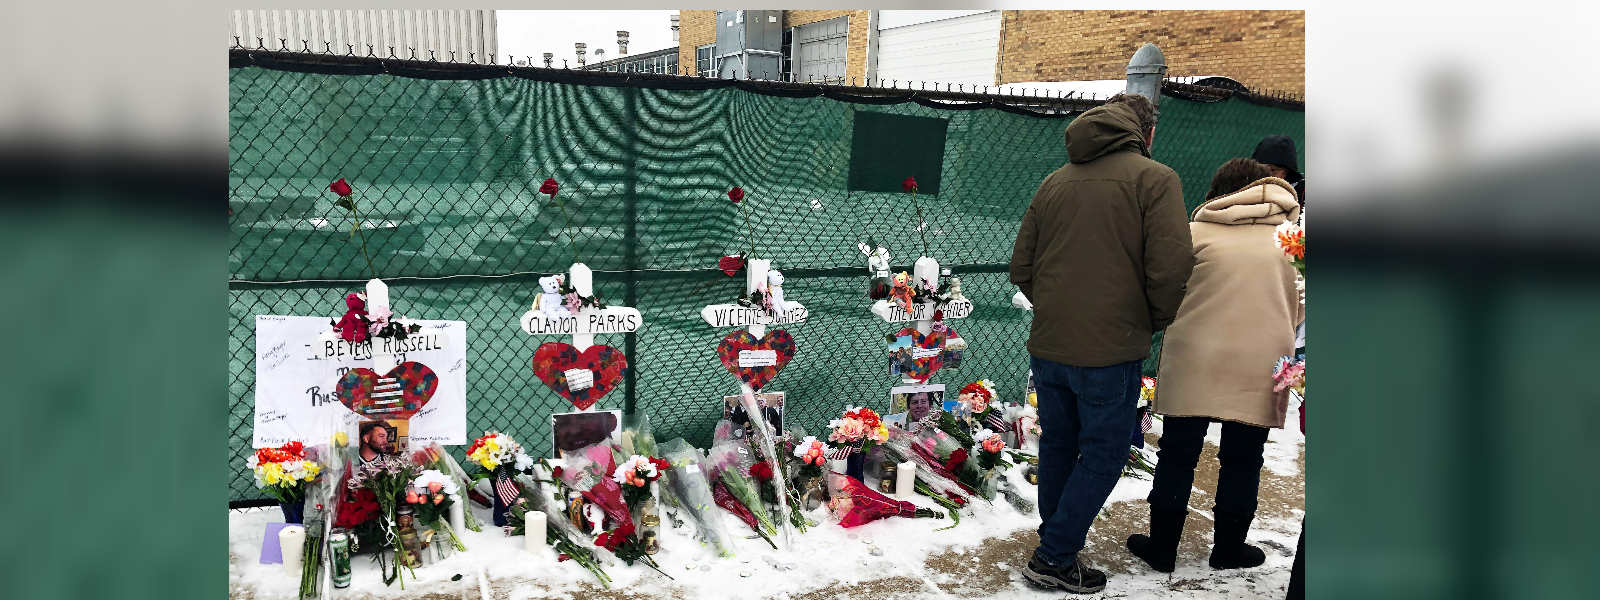 Thousands in freezing cold for Illinois shooting